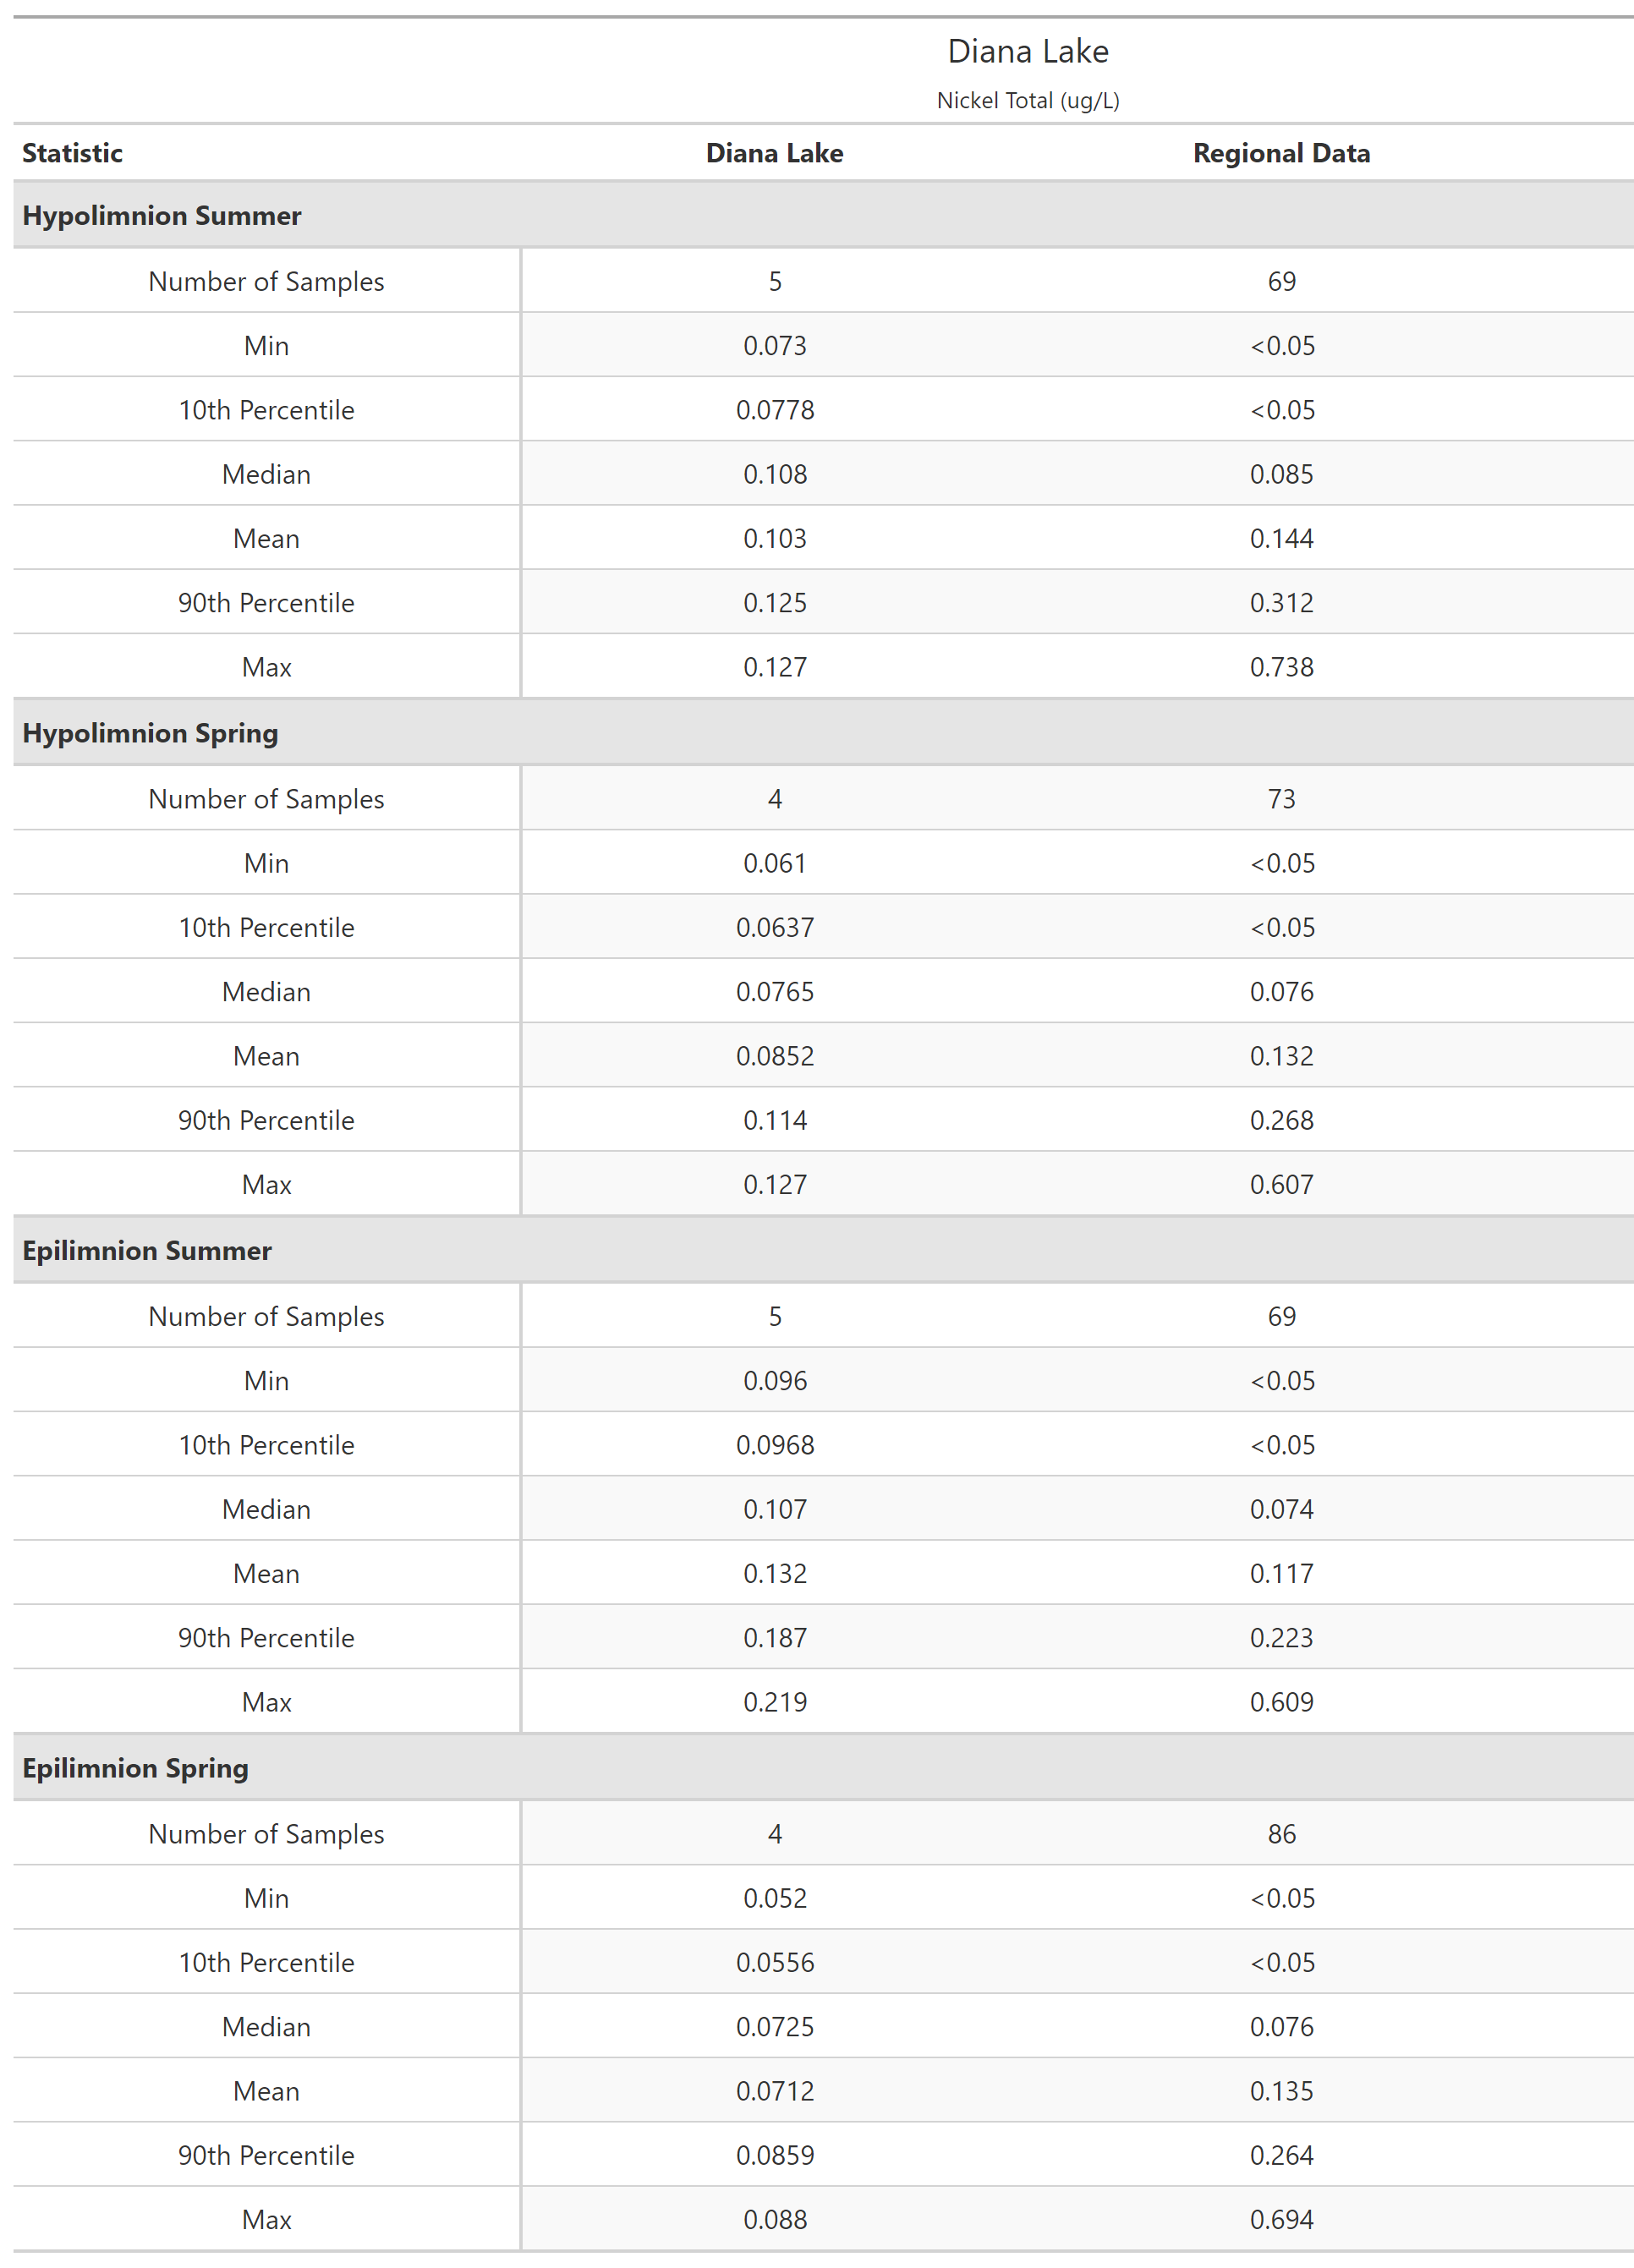 A table of summary statistics for Nickel Total with comparison to regional data